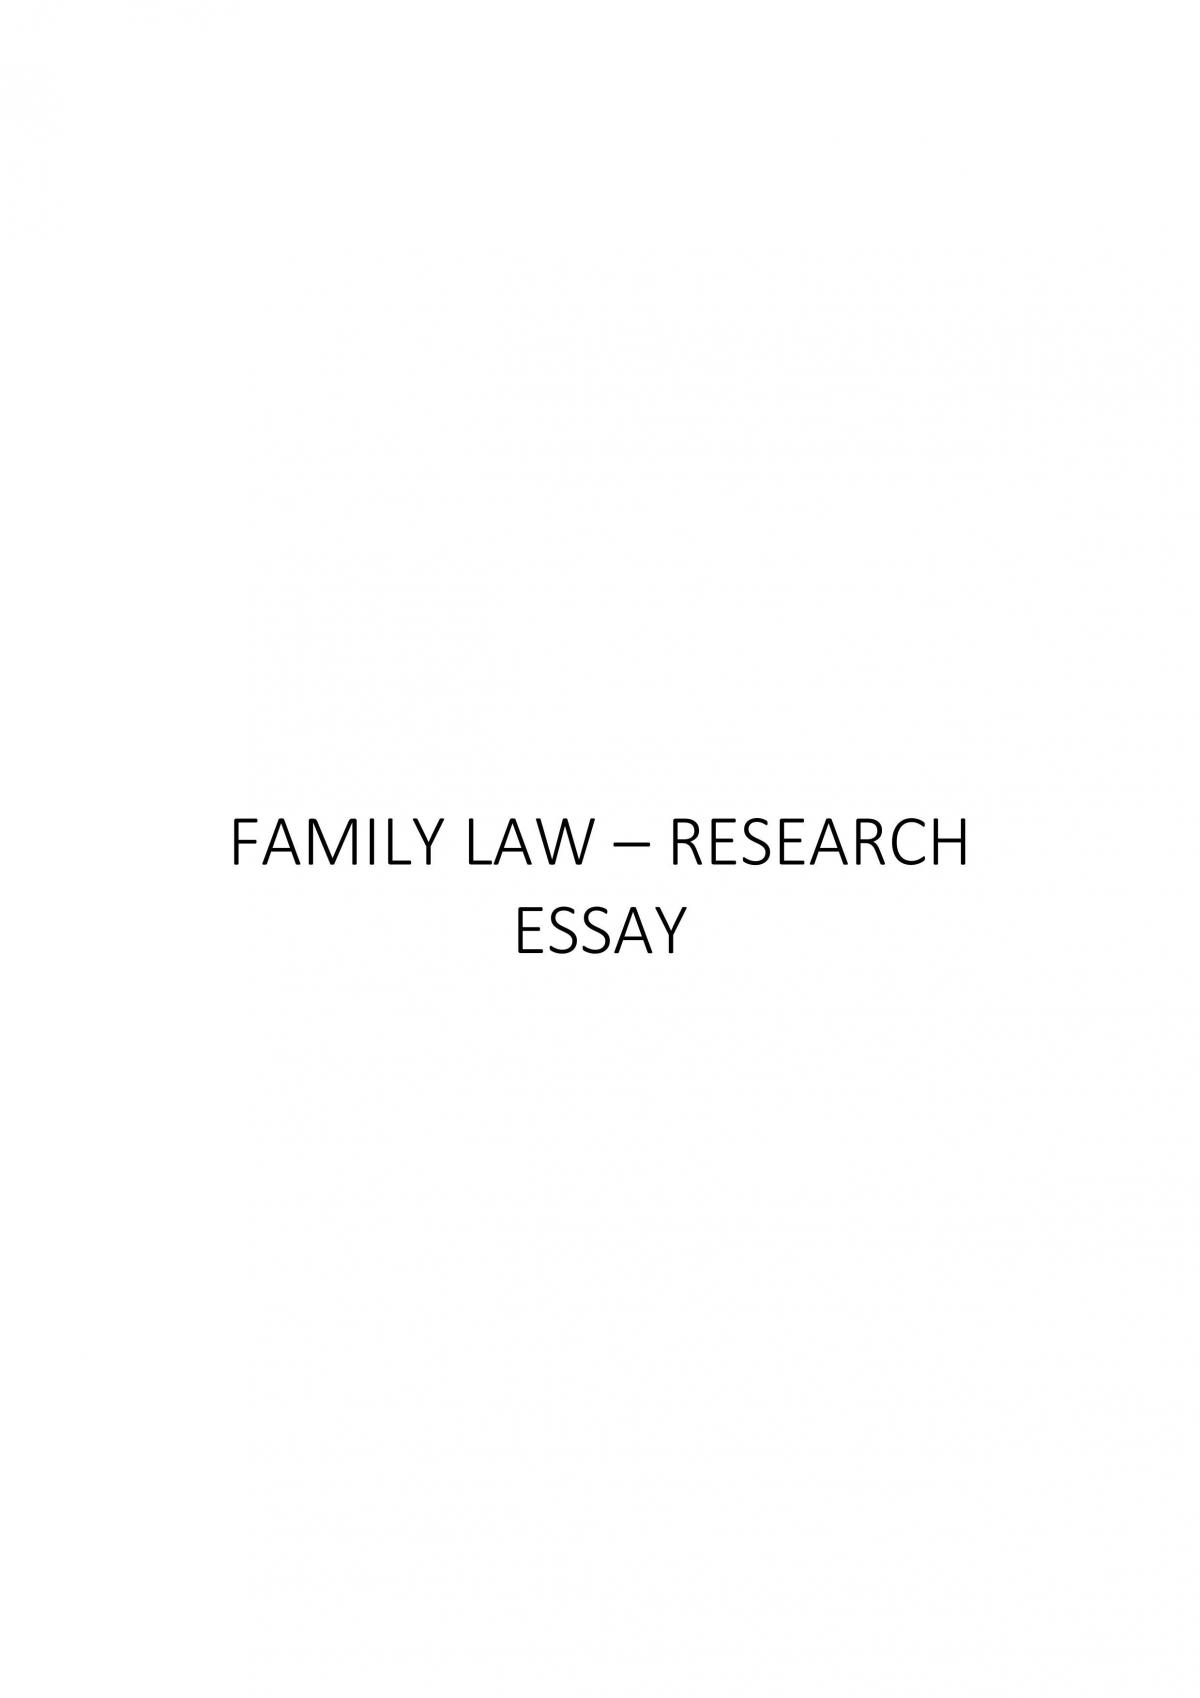 dissertation in family law